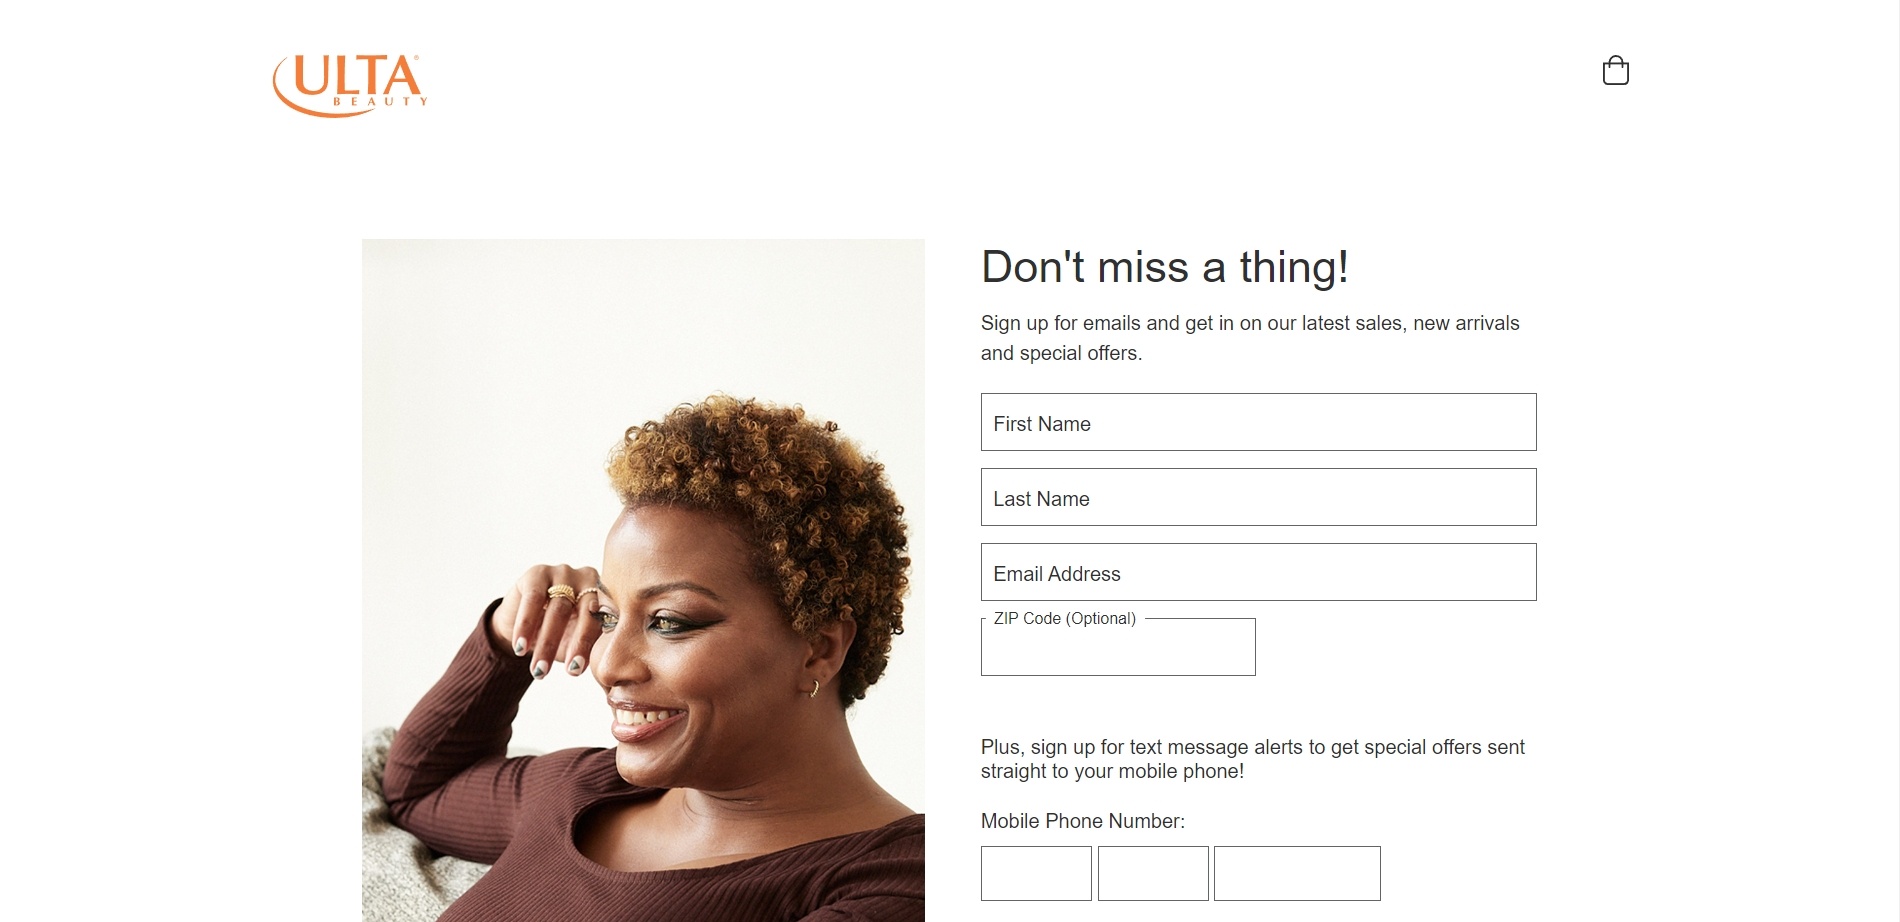 Ulta Beauty’s email sign up form offers to keep visitors in the loop